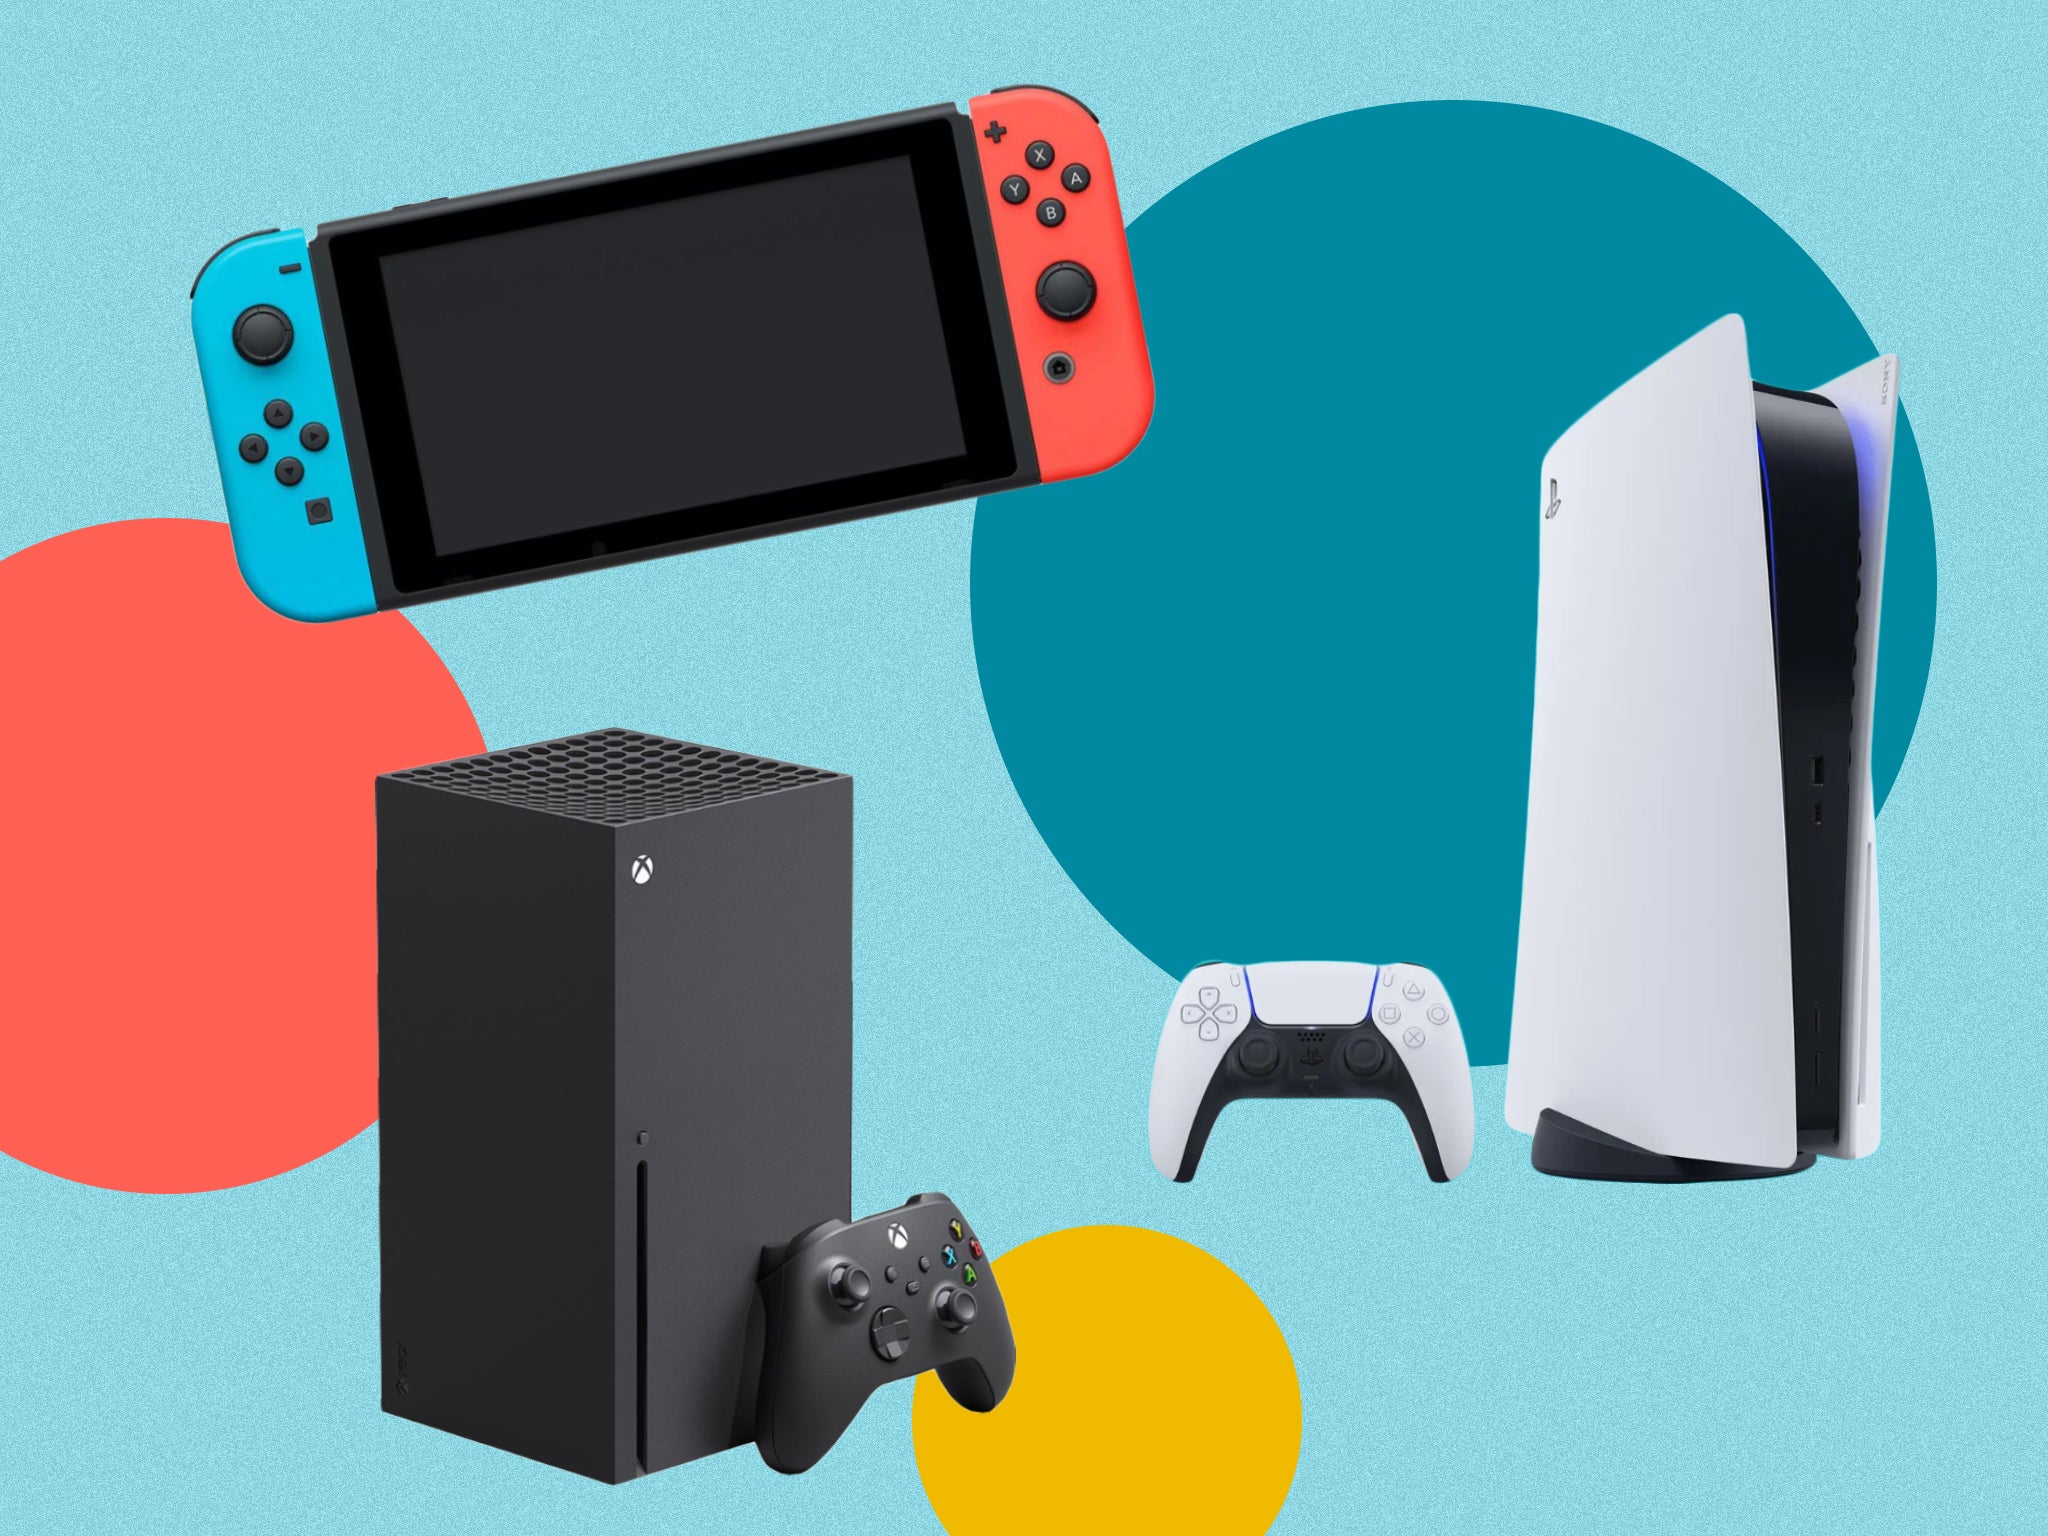 Black Friday 2021 gaming deals for Nintendo Switch, PS5, and Xbox